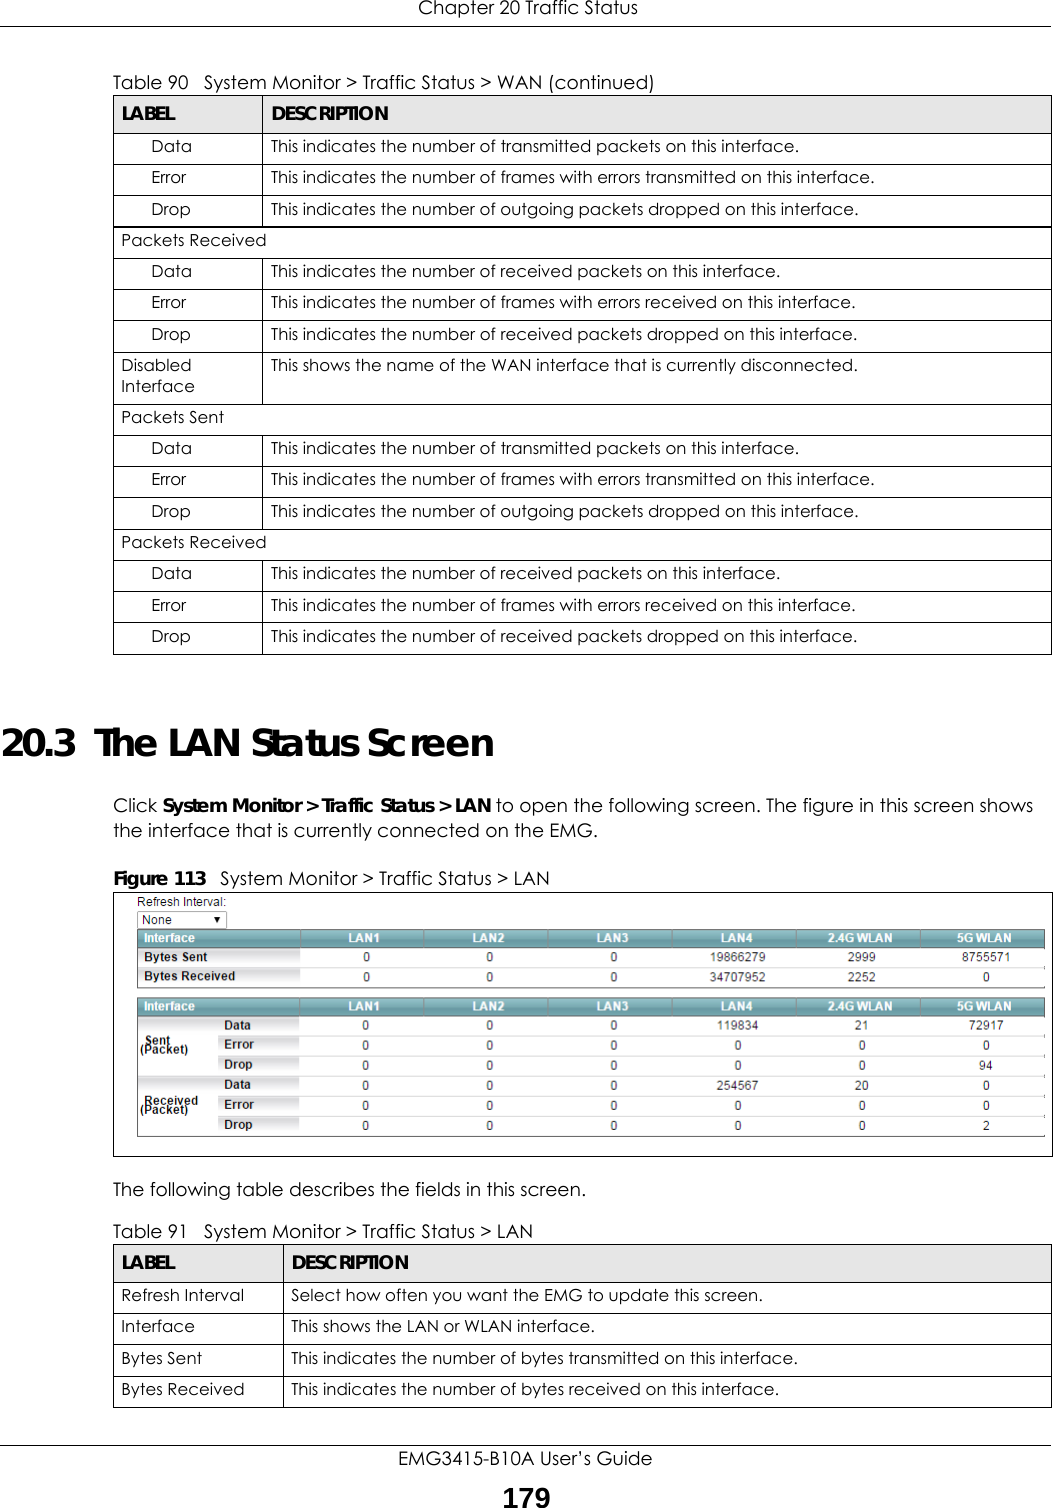  Chapter 20 Traffic StatusEMG3415-B10A User’s Guide17920.3  The LAN Status ScreenClick System Monitor &gt; Traffic Status &gt; LAN to open the following screen. The figure in this screen shows the interface that is currently connected on the EMG.Figure 113   System Monitor &gt; Traffic Status &gt; LANThe following table describes the fields in this screen.    Data  This indicates the number of transmitted packets on this interface.Error This indicates the number of frames with errors transmitted on this interface.Drop This indicates the number of outgoing packets dropped on this interface.Packets ReceivedData  This indicates the number of received packets on this interface.Error This indicates the number of frames with errors received on this interface.Drop This indicates the number of received packets dropped on this interface.Disabled InterfaceThis shows the name of the WAN interface that is currently disconnected.Packets Sent Data  This indicates the number of transmitted packets on this interface.Error This indicates the number of frames with errors transmitted on this interface.Drop This indicates the number of outgoing packets dropped on this interface.Packets ReceivedData  This indicates the number of received packets on this interface.Error This indicates the number of frames with errors received on this interface.Drop This indicates the number of received packets dropped on this interface.Table 90   System Monitor &gt; Traffic Status &gt; WAN (continued)LABEL DESCRIPTIONTable 91   System Monitor &gt; Traffic Status &gt; LANLABEL DESCRIPTIONRefresh Interval Select how often you want the EMG to update this screen.Interface This shows the LAN or WLAN interface. Bytes Sent This indicates the number of bytes transmitted on this interface.Bytes Received This indicates the number of bytes received on this interface.